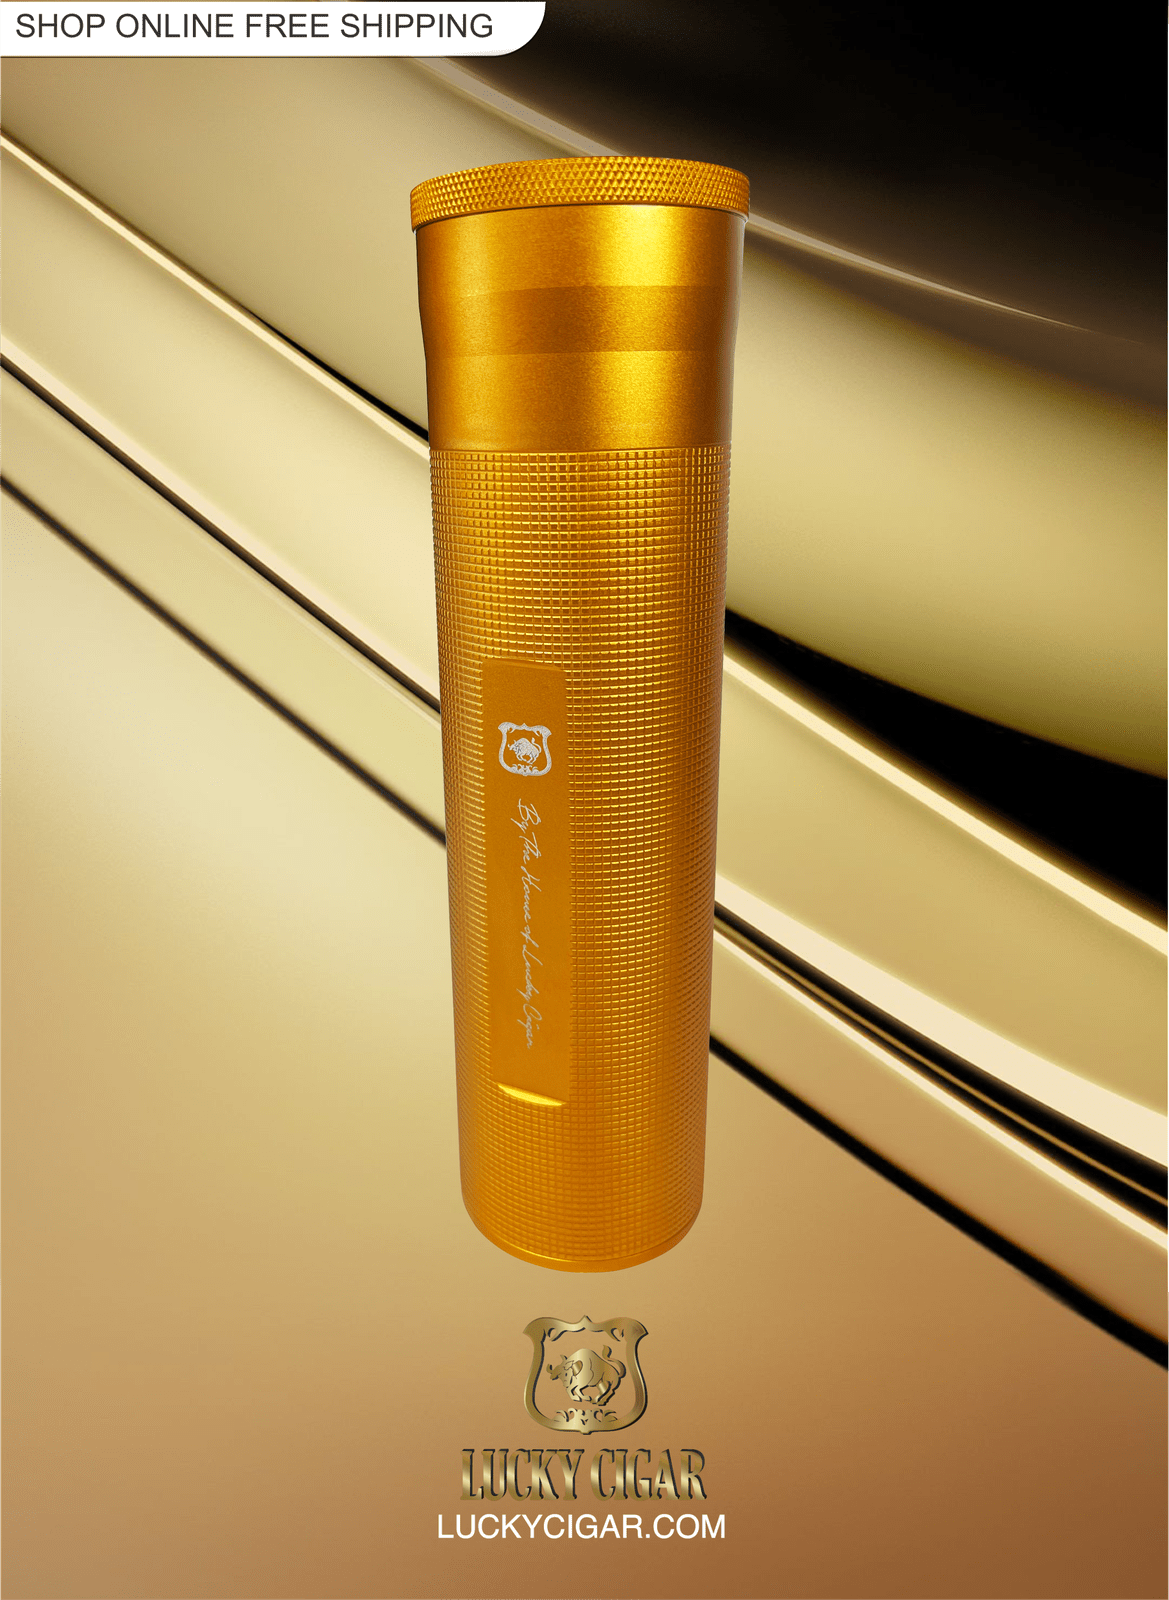 Cigar Lifestyle Accessories: Lucky Cigar Gold Humidor